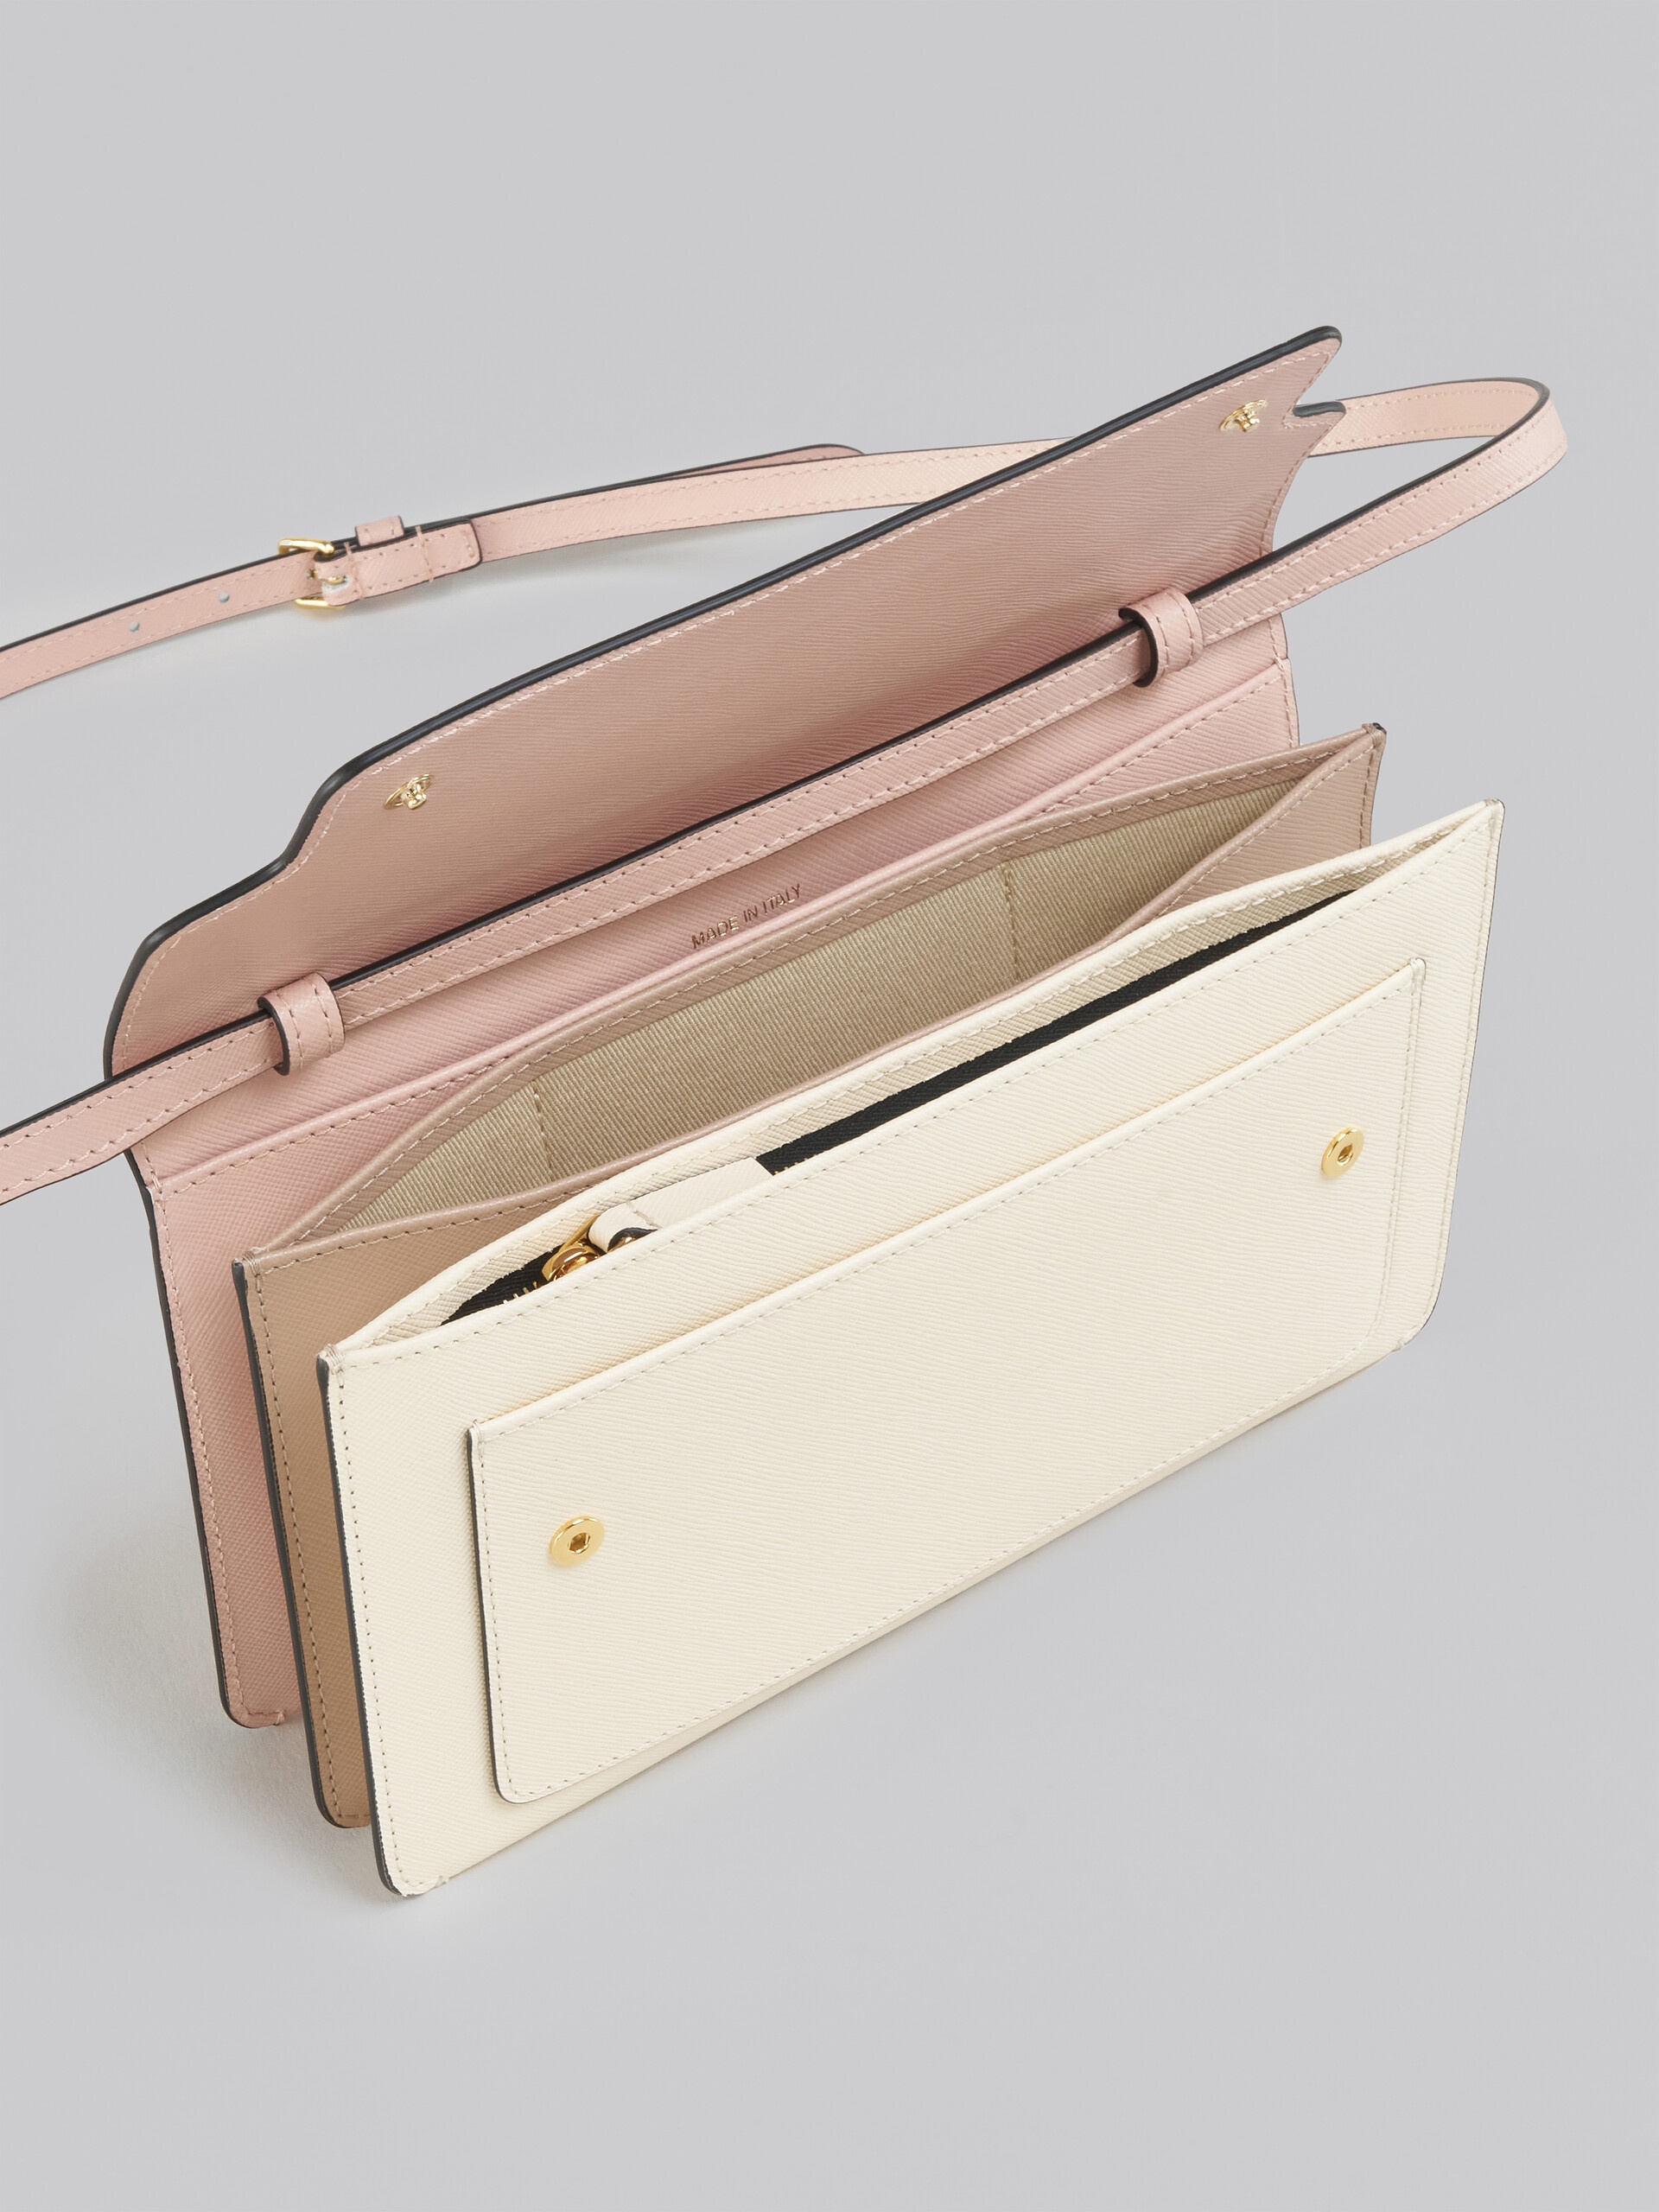 TRUNK CLUTCH IN PINK WHITE AND BEIGE SAFFIANO LEATHER - 4